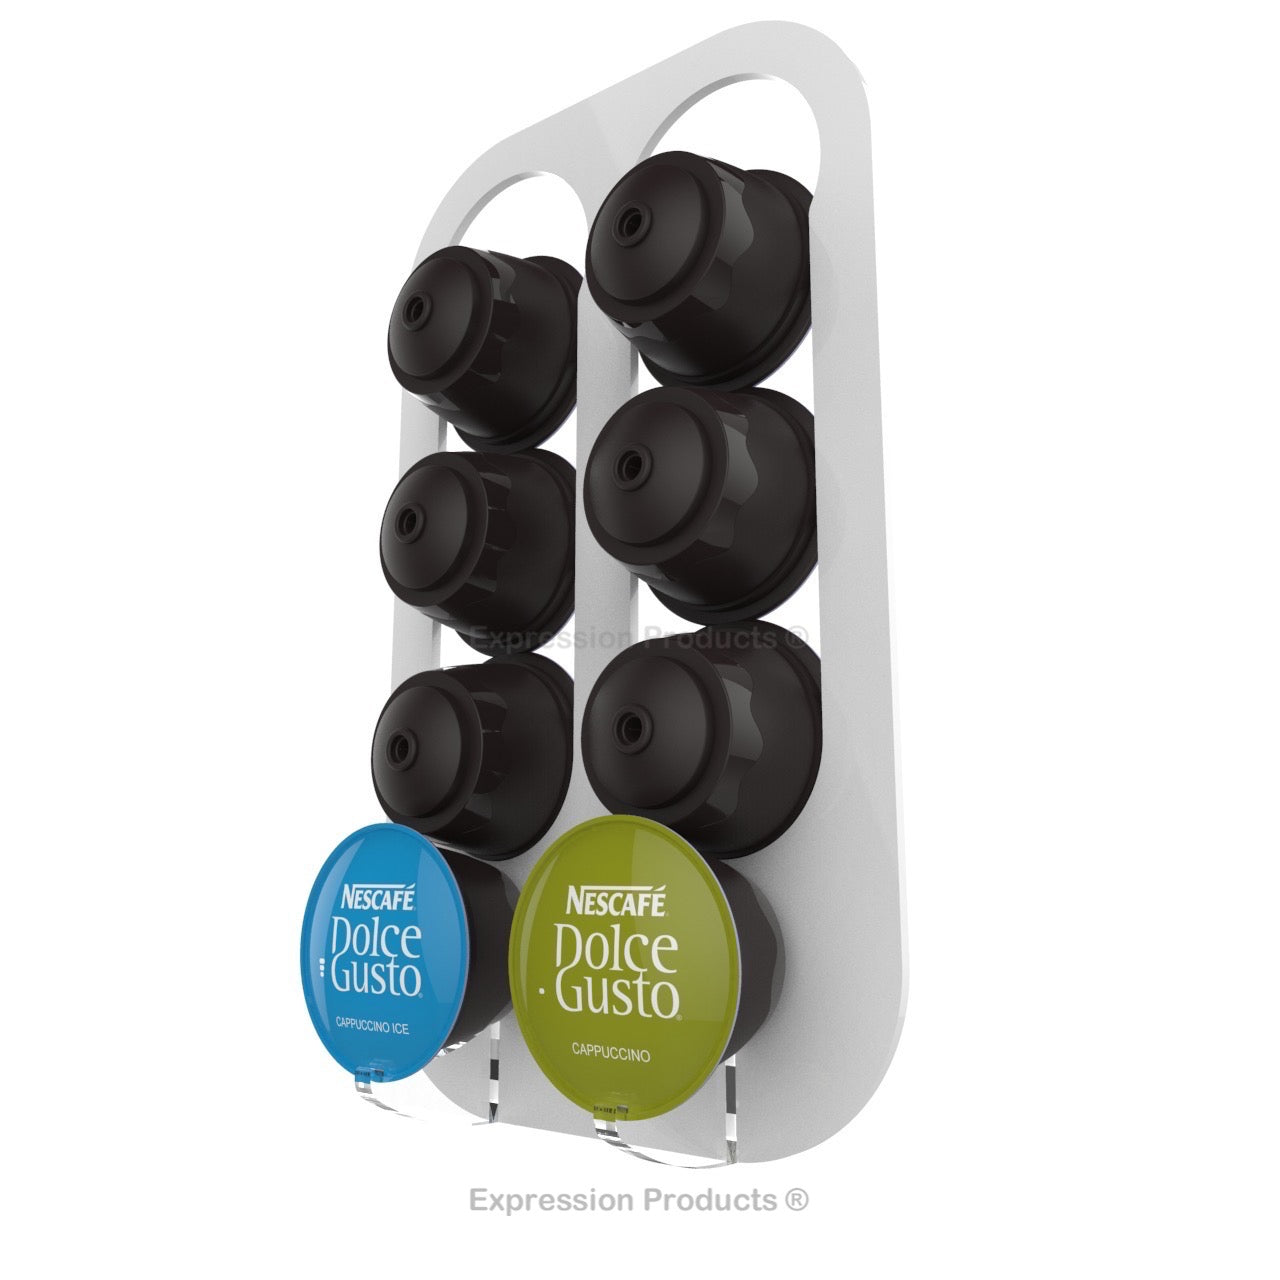 Dolce gusto coffee pod holder, wall mounted, half height.  Shown in white holding 8 pods